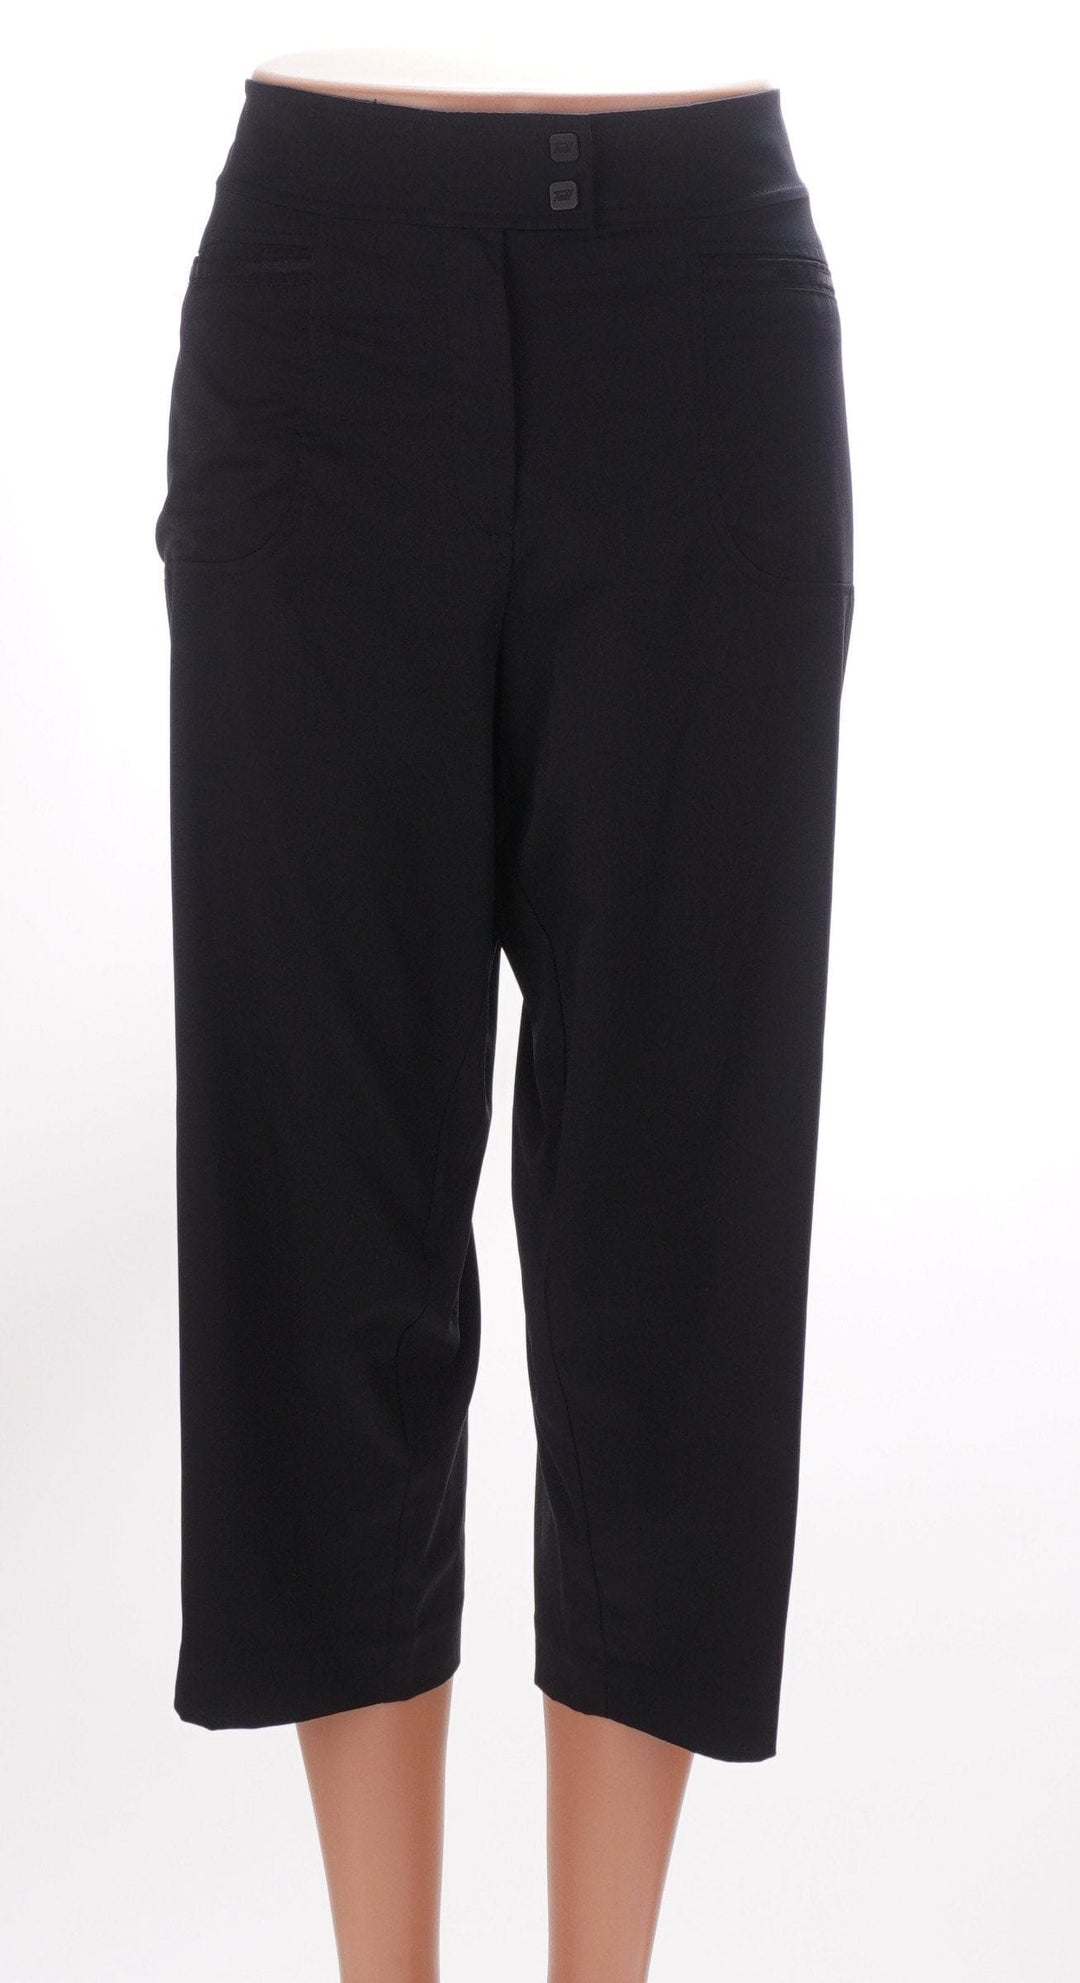 Tail Black / Consigned / 12 Tail Golf Pants - Black - Size 12